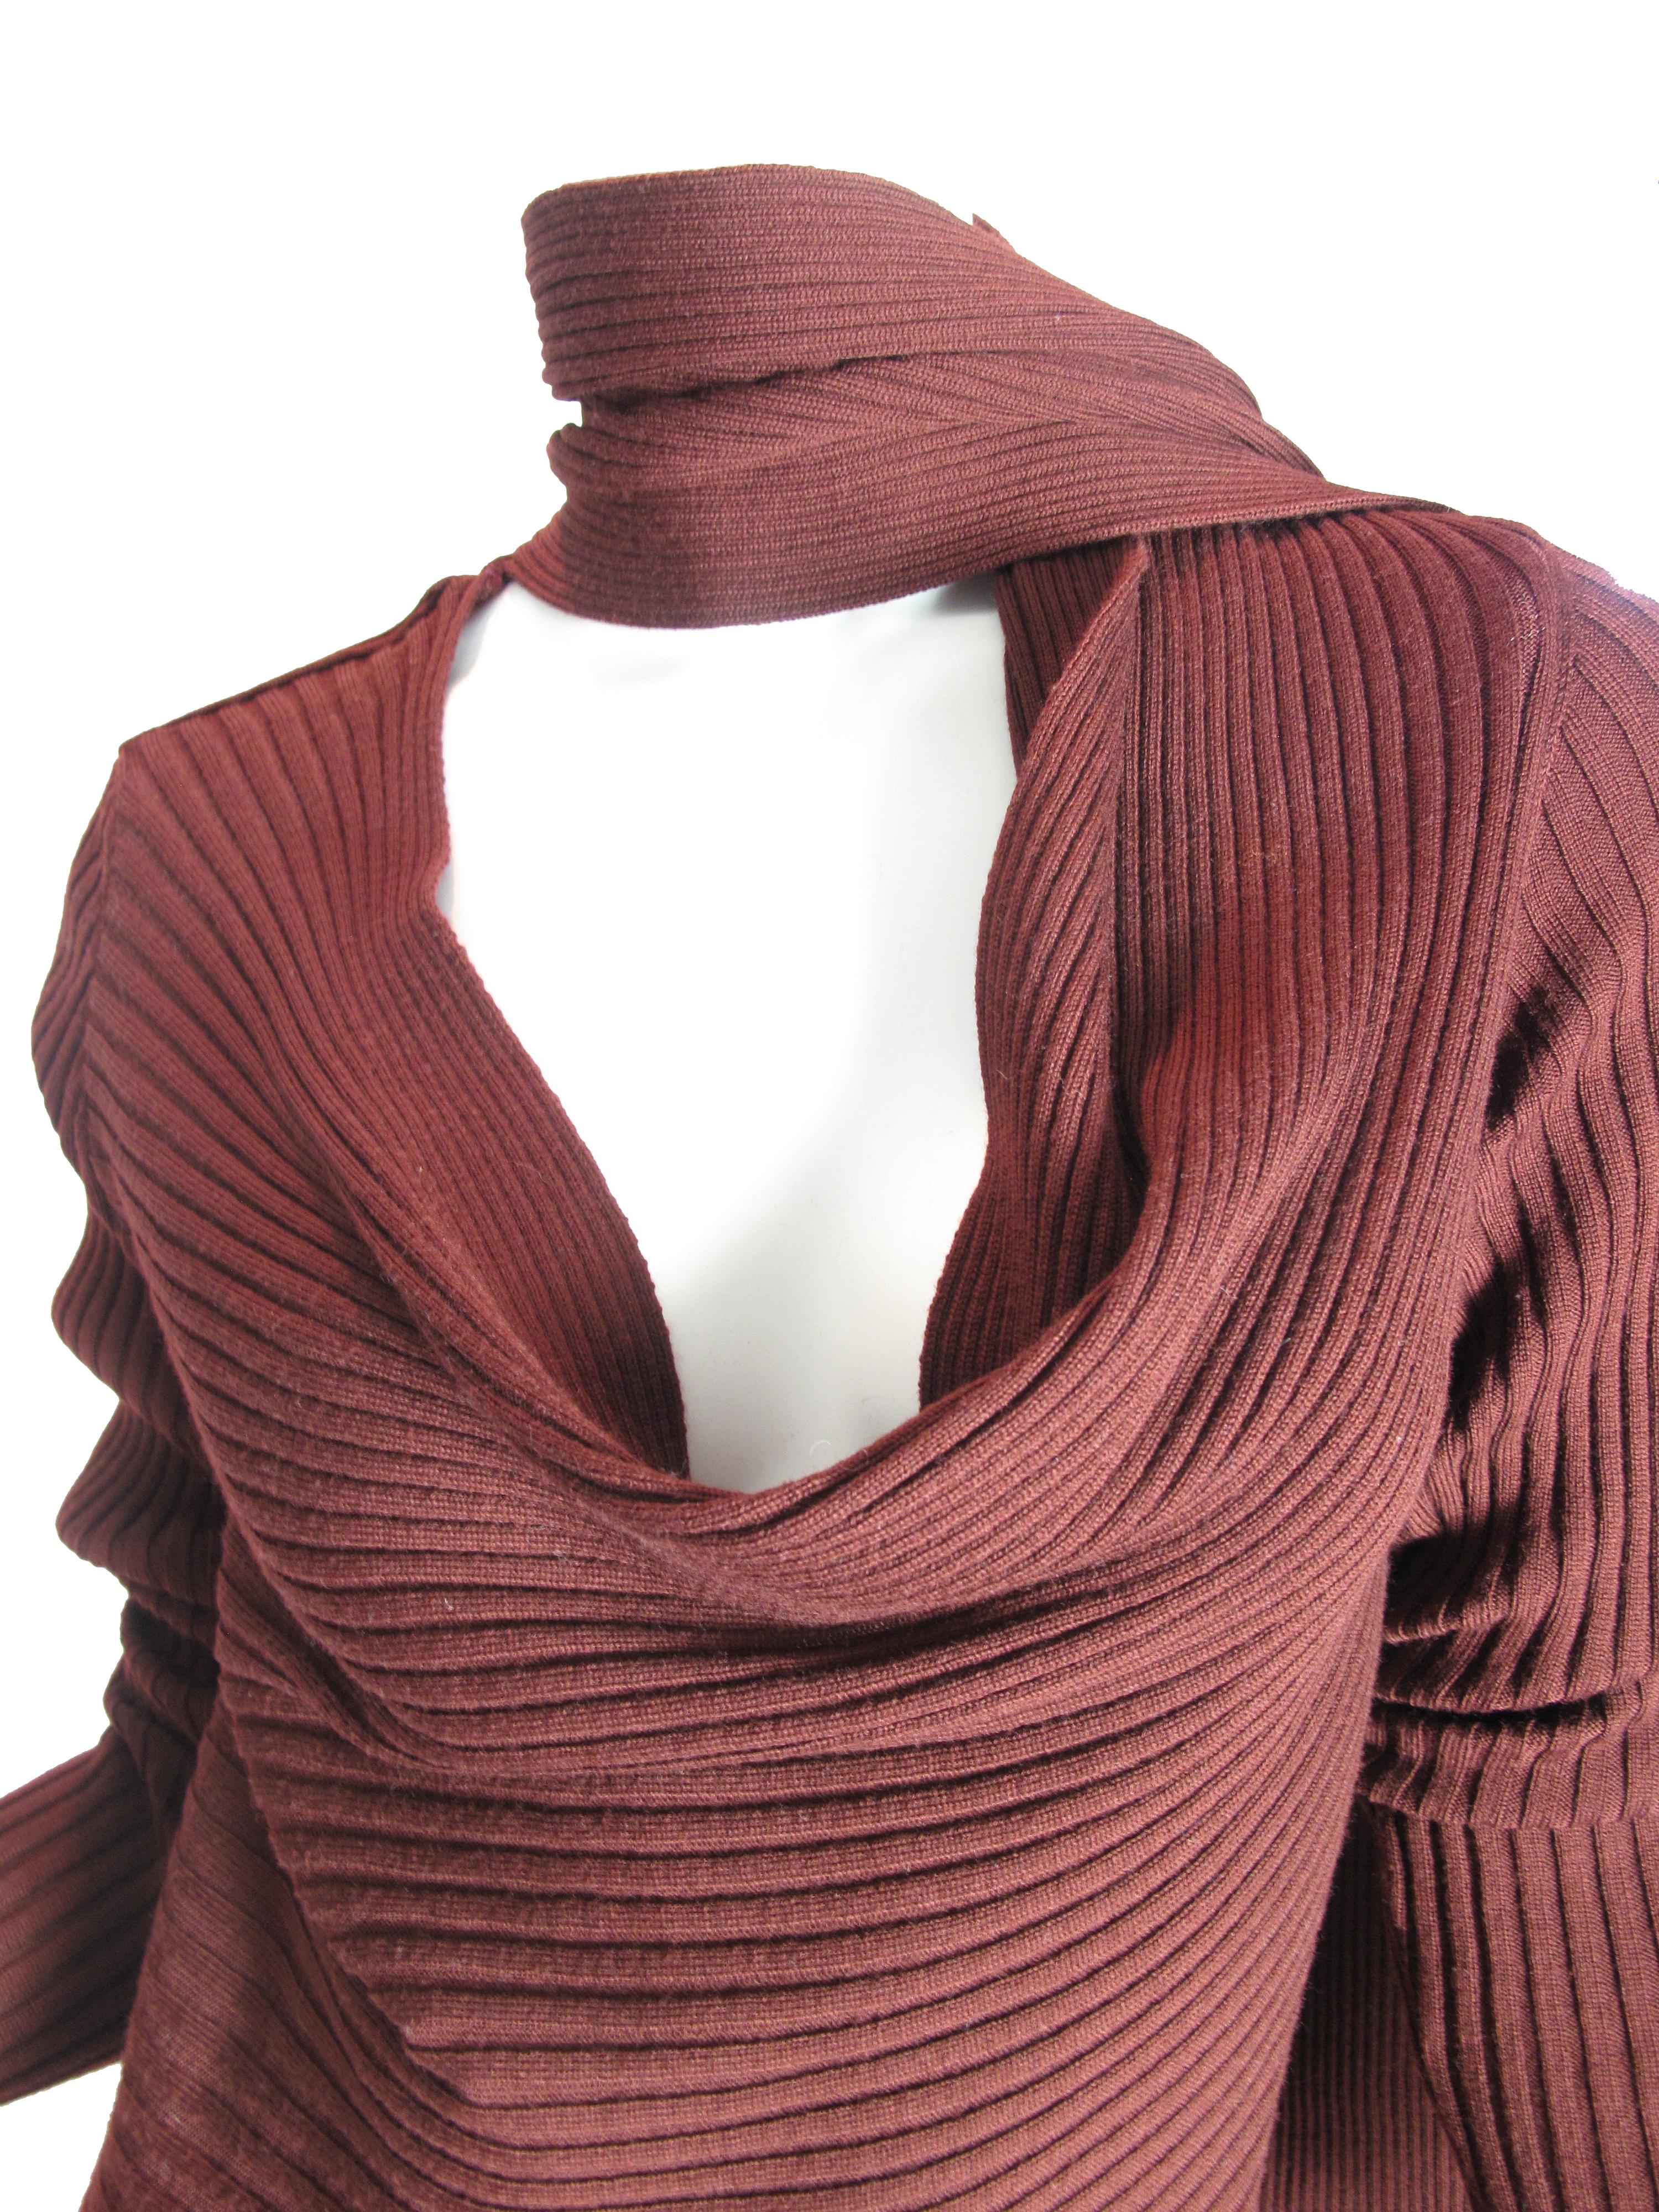 Jean Paul Gaultier Maille maroon knit dress with fringe and long attached scarf. 36